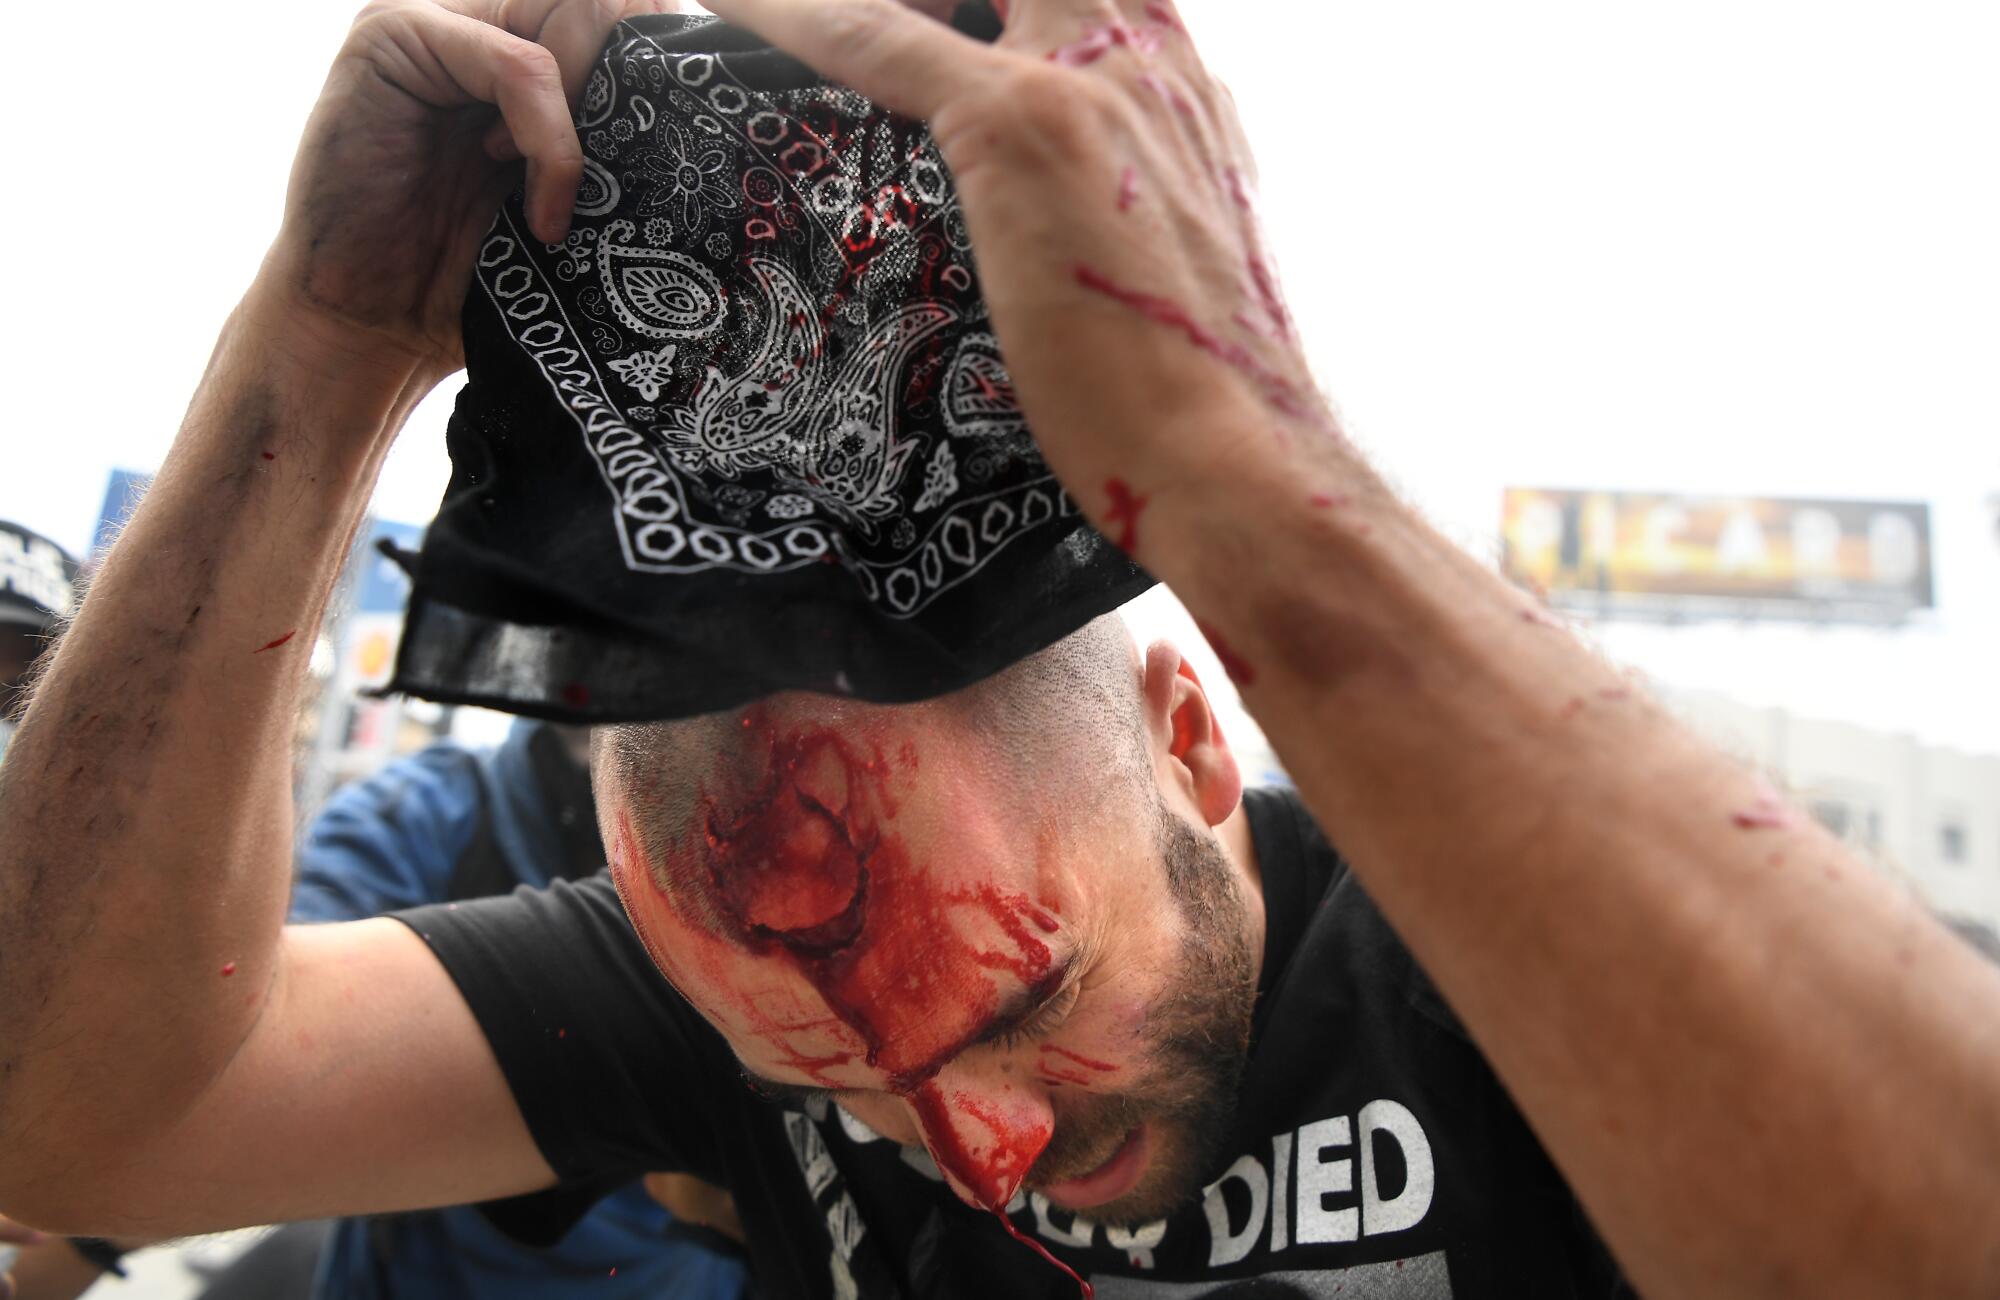 A protester runs for safety after being shot with a rubber projectile from LAPD officers.